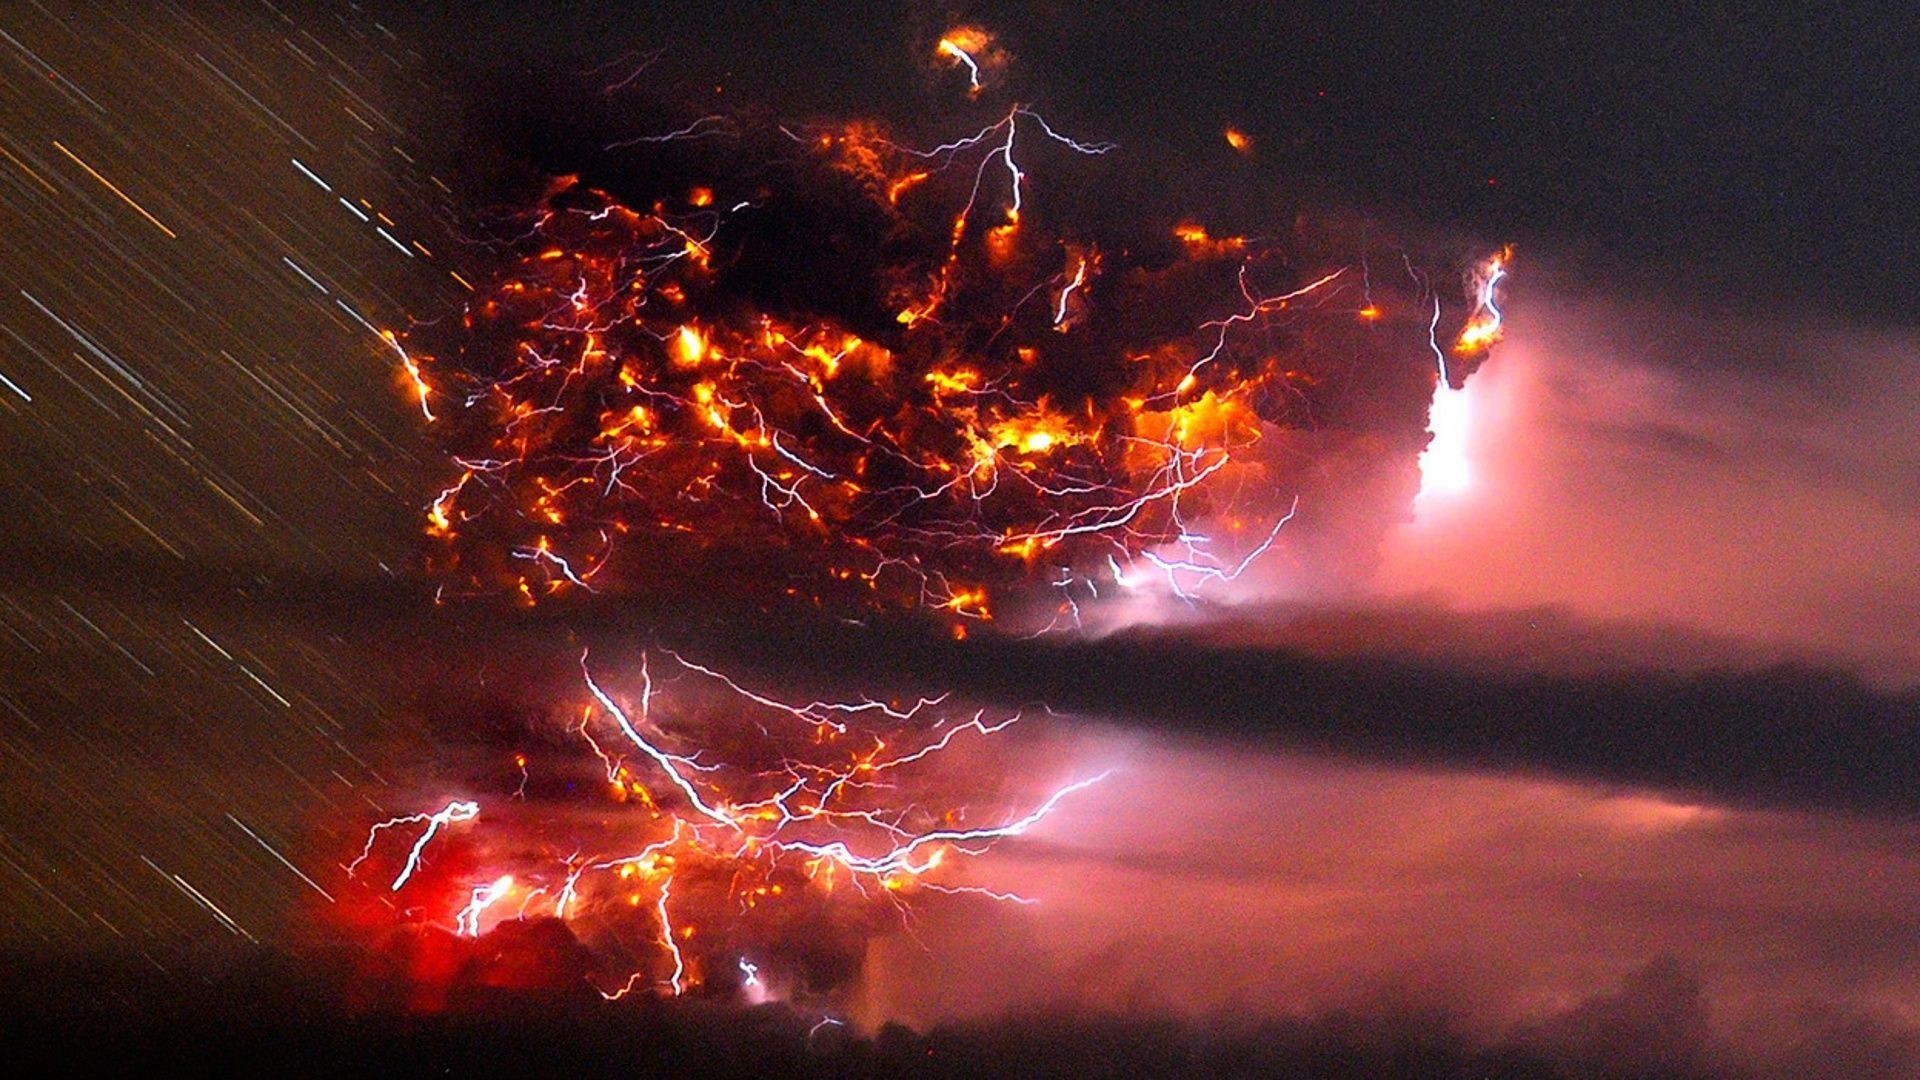 1920x1080 Natural Disasters Lightning Pictures Wallpapers Downloads | Wallpapers 4k |  Pinterest | Lightning strikes, Lightning and Wallpaper